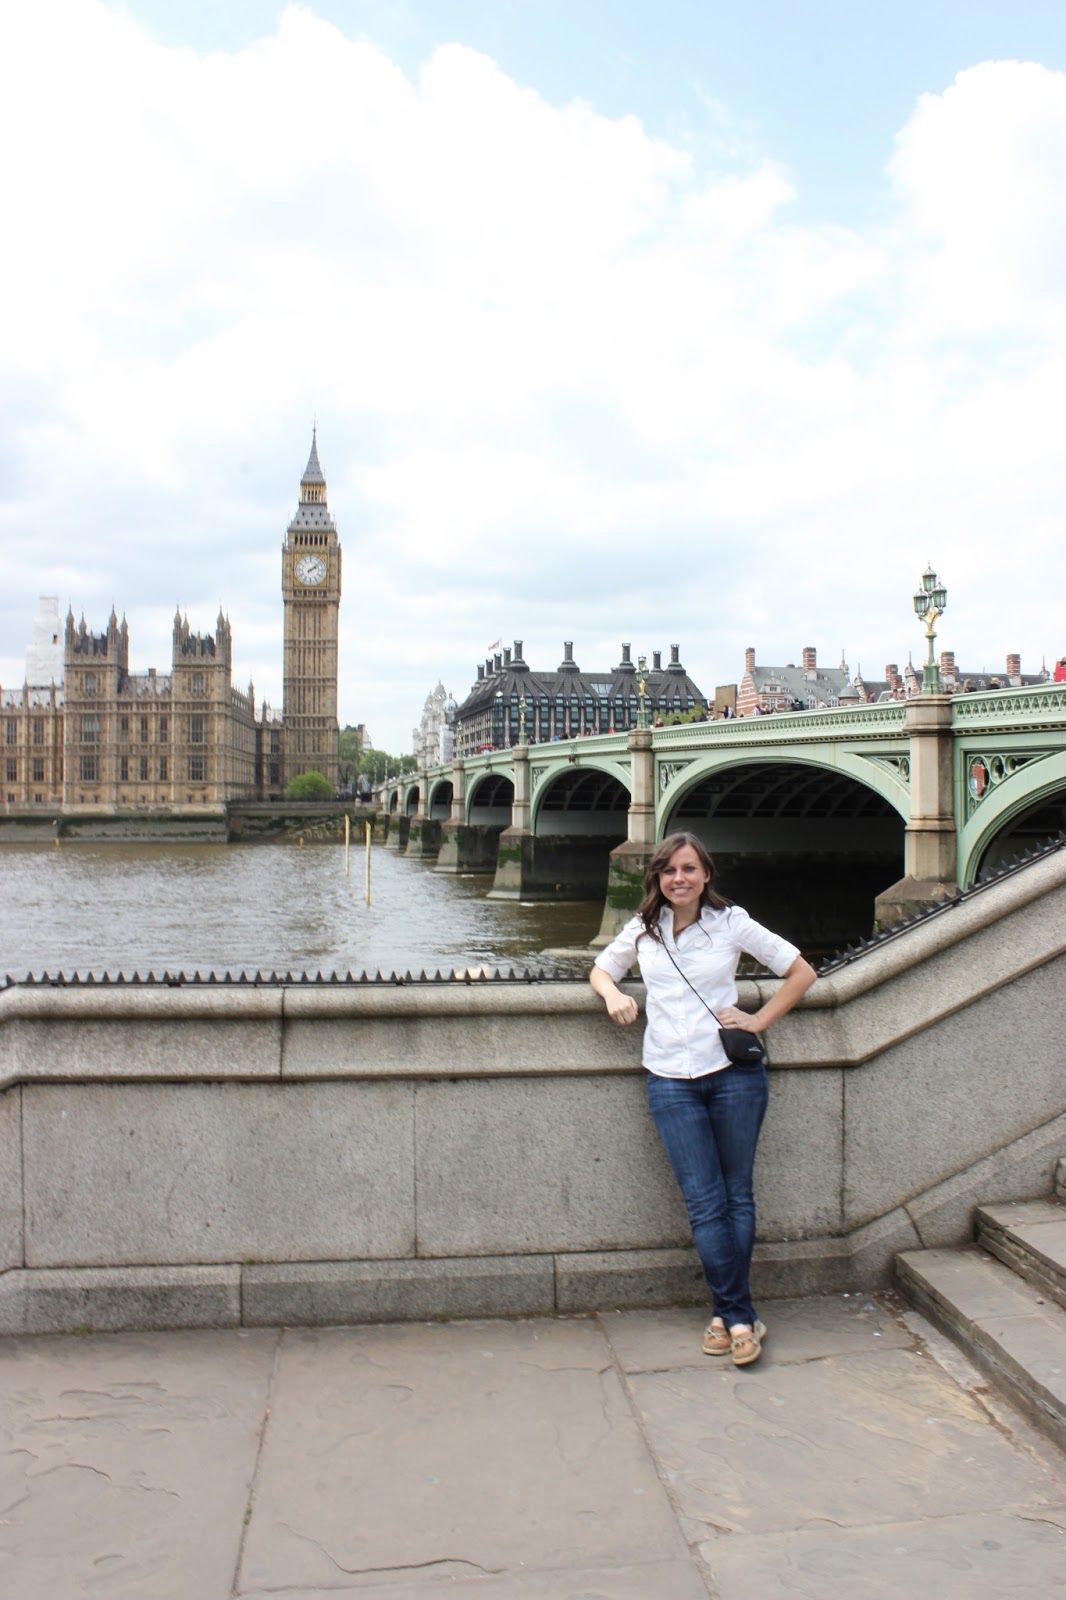 London Trip: Touring Big Ben and other scenic stops